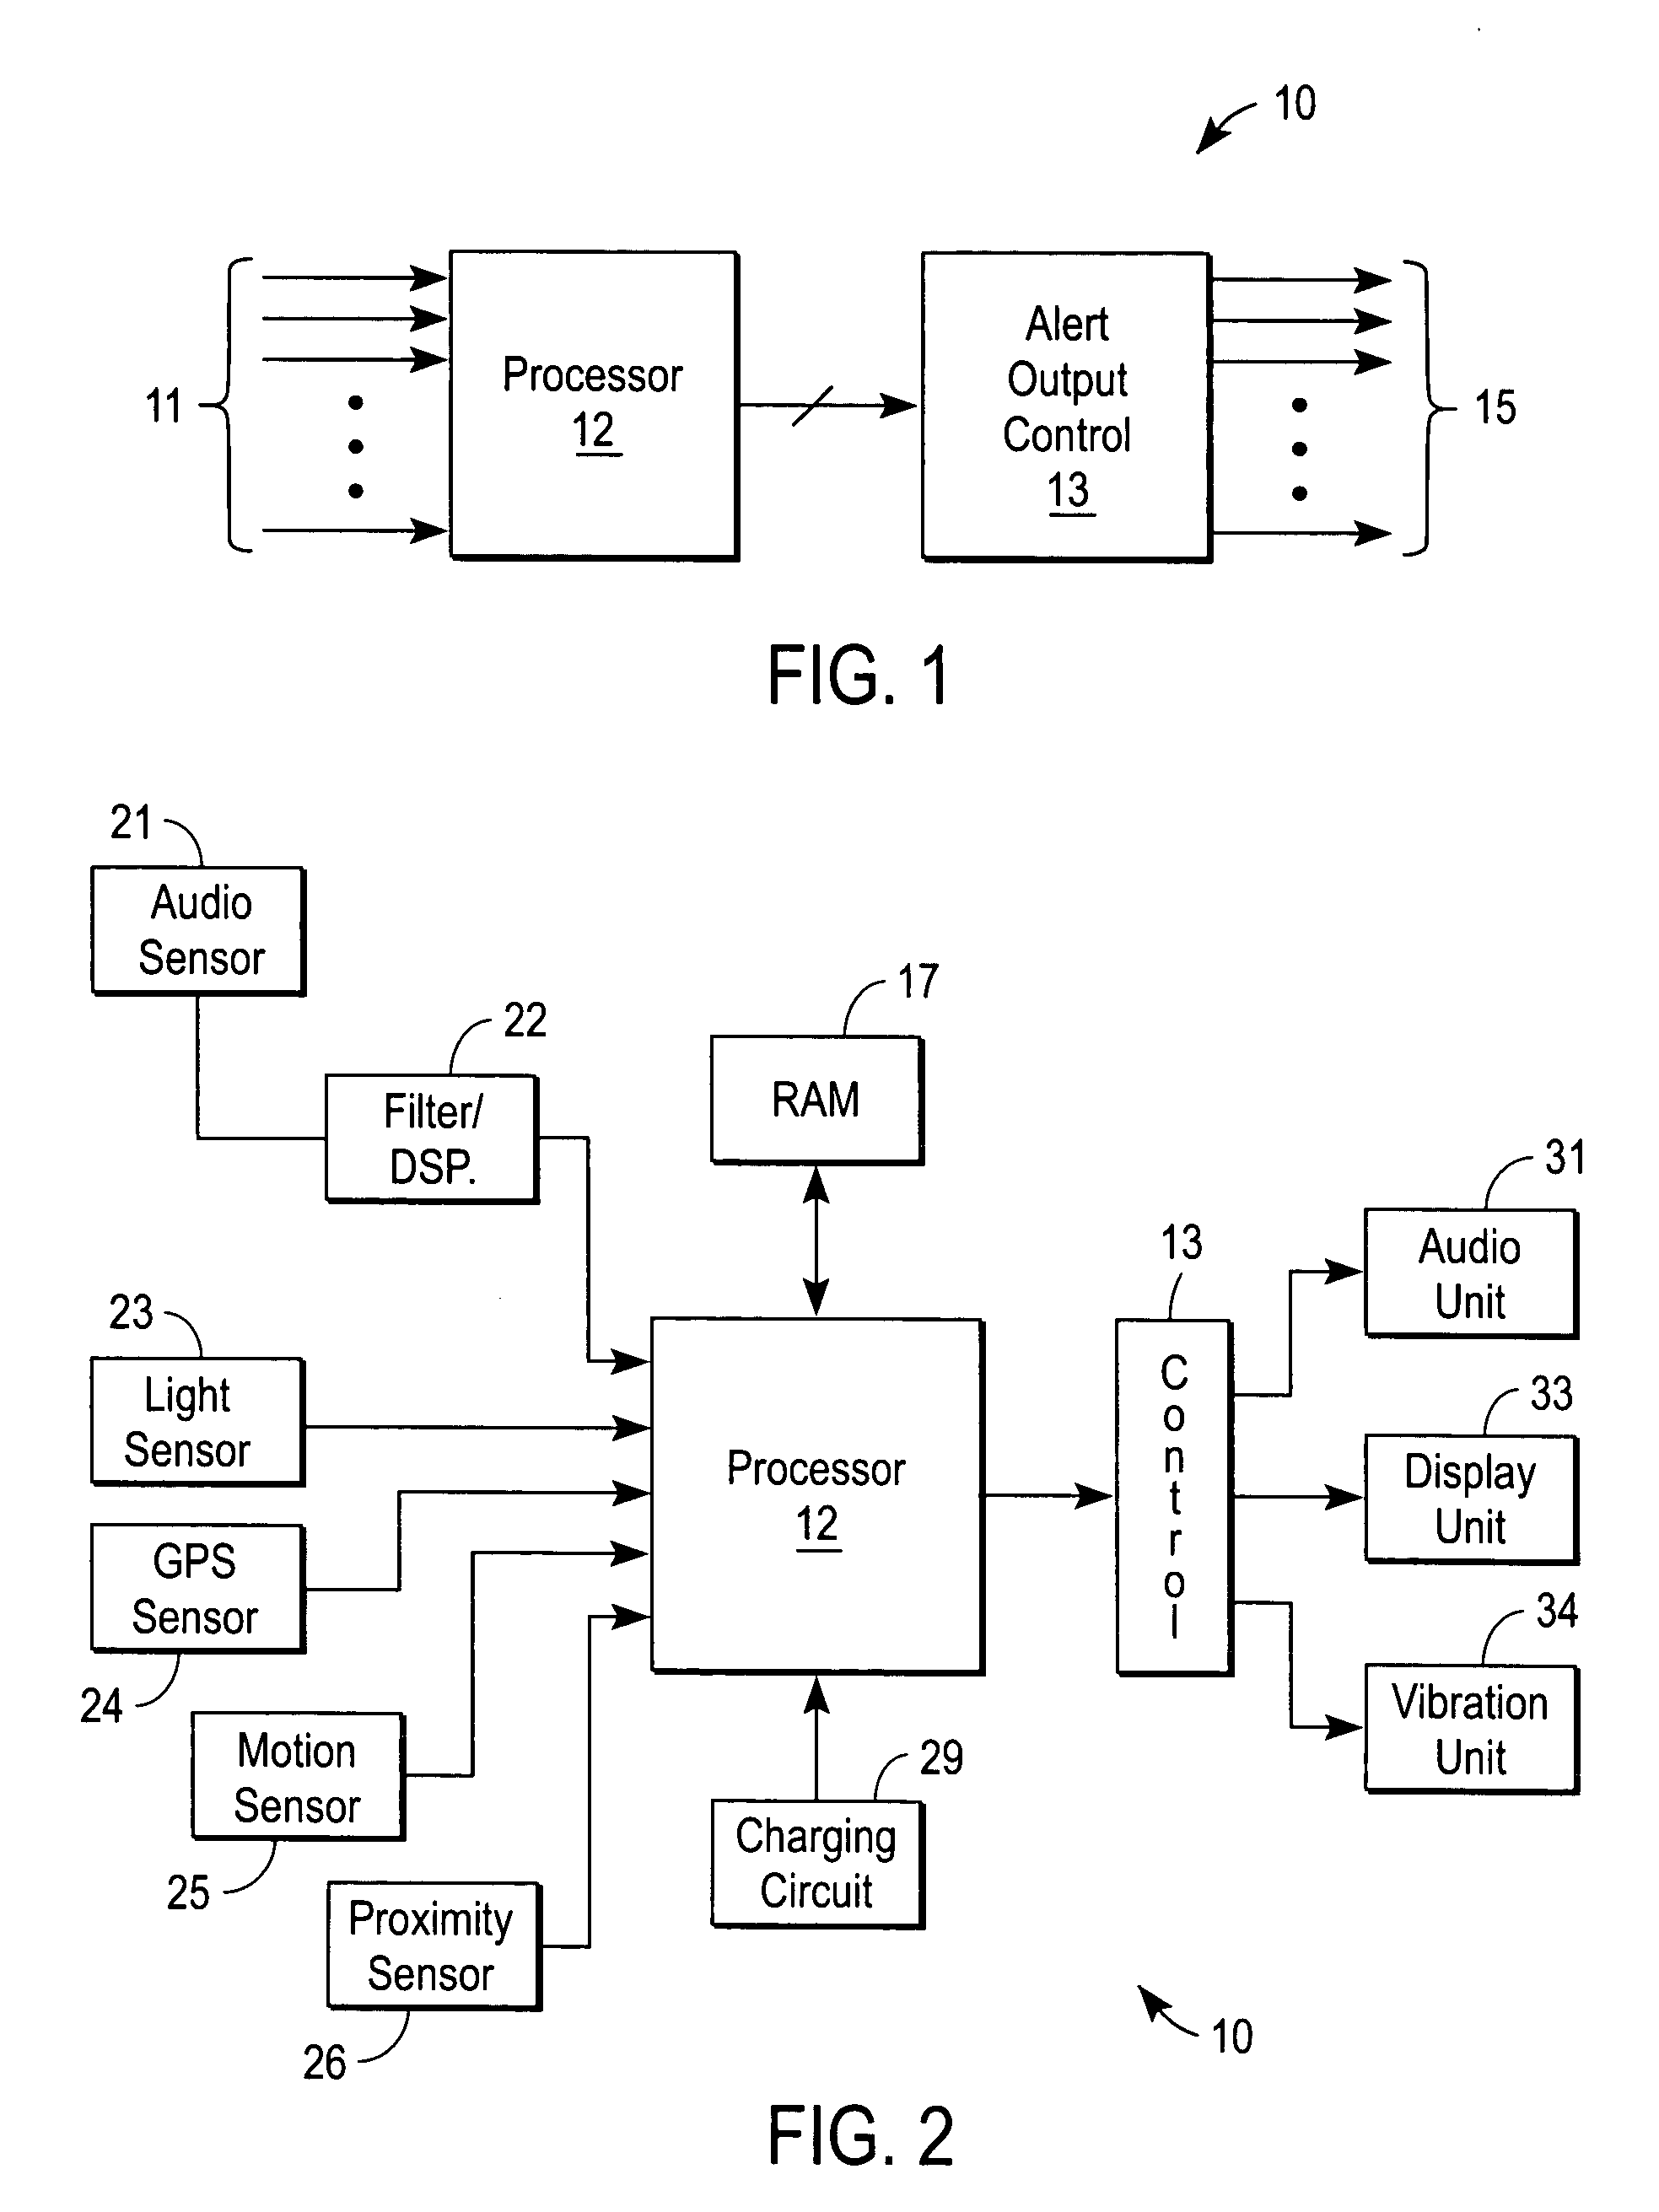 Handheld communications device with automatic alert mode selection